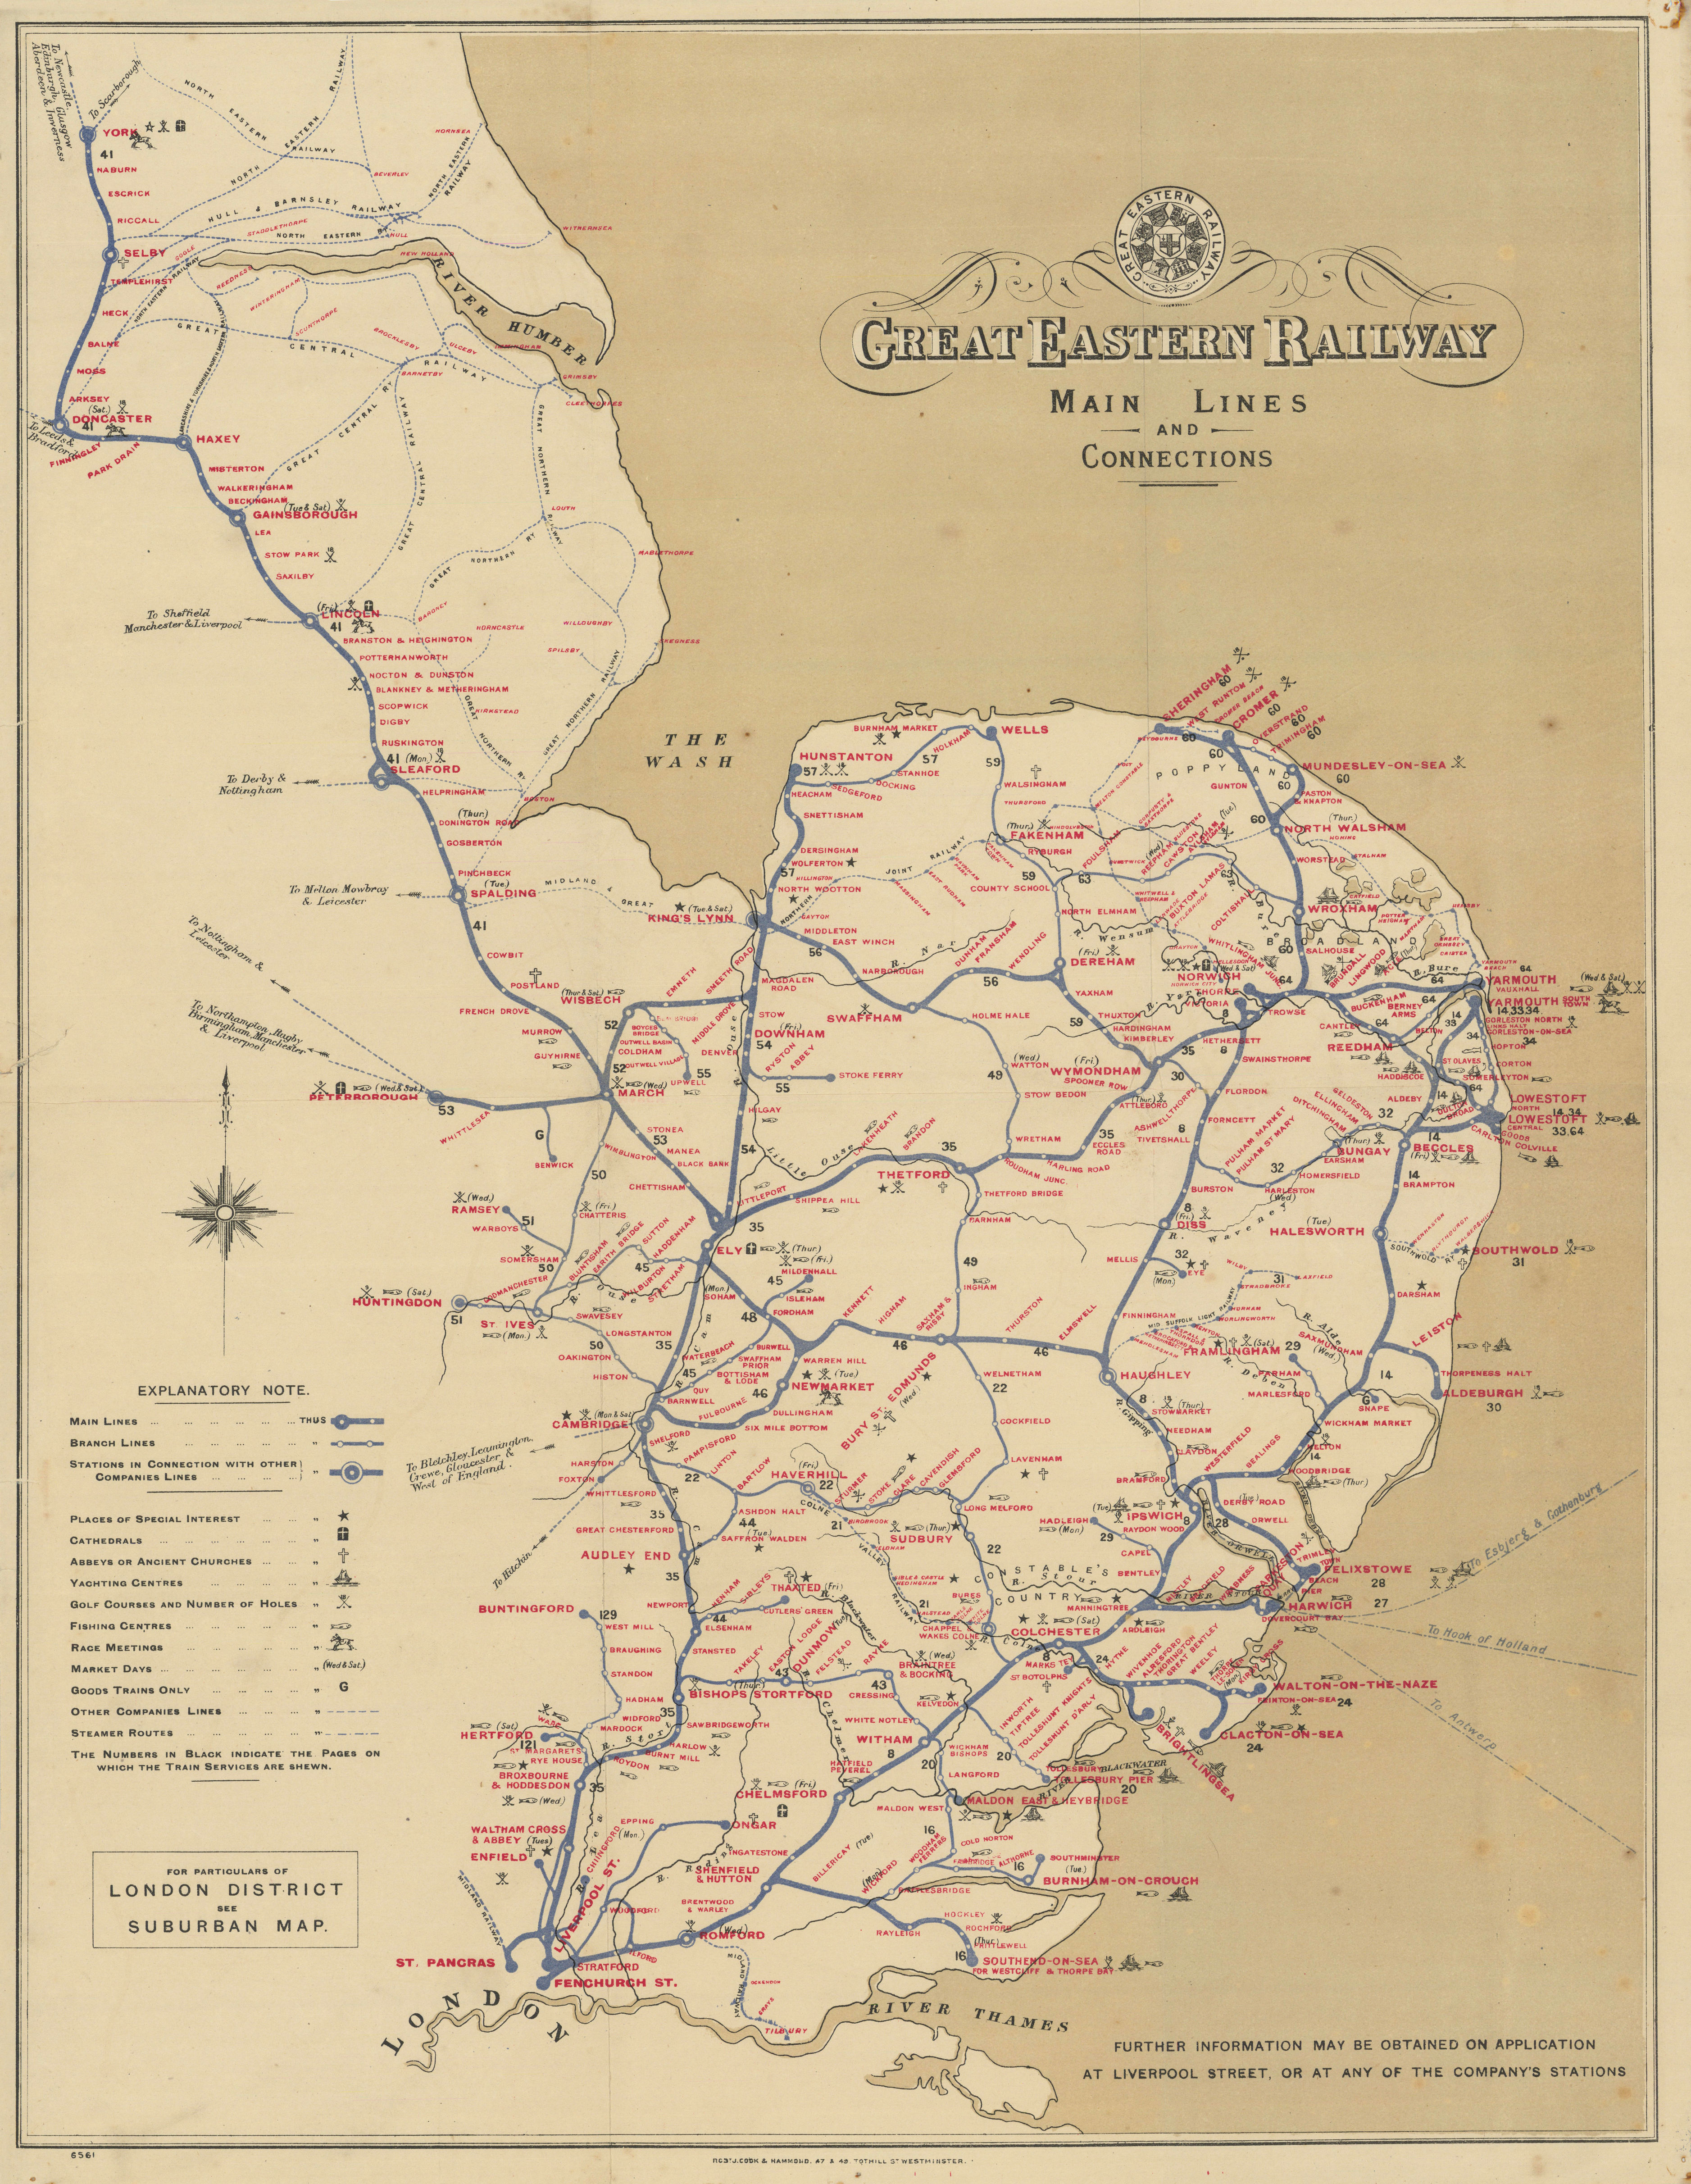 Associate Product Great Eastern Railway - Main lines and connections c1918 old antique map chart